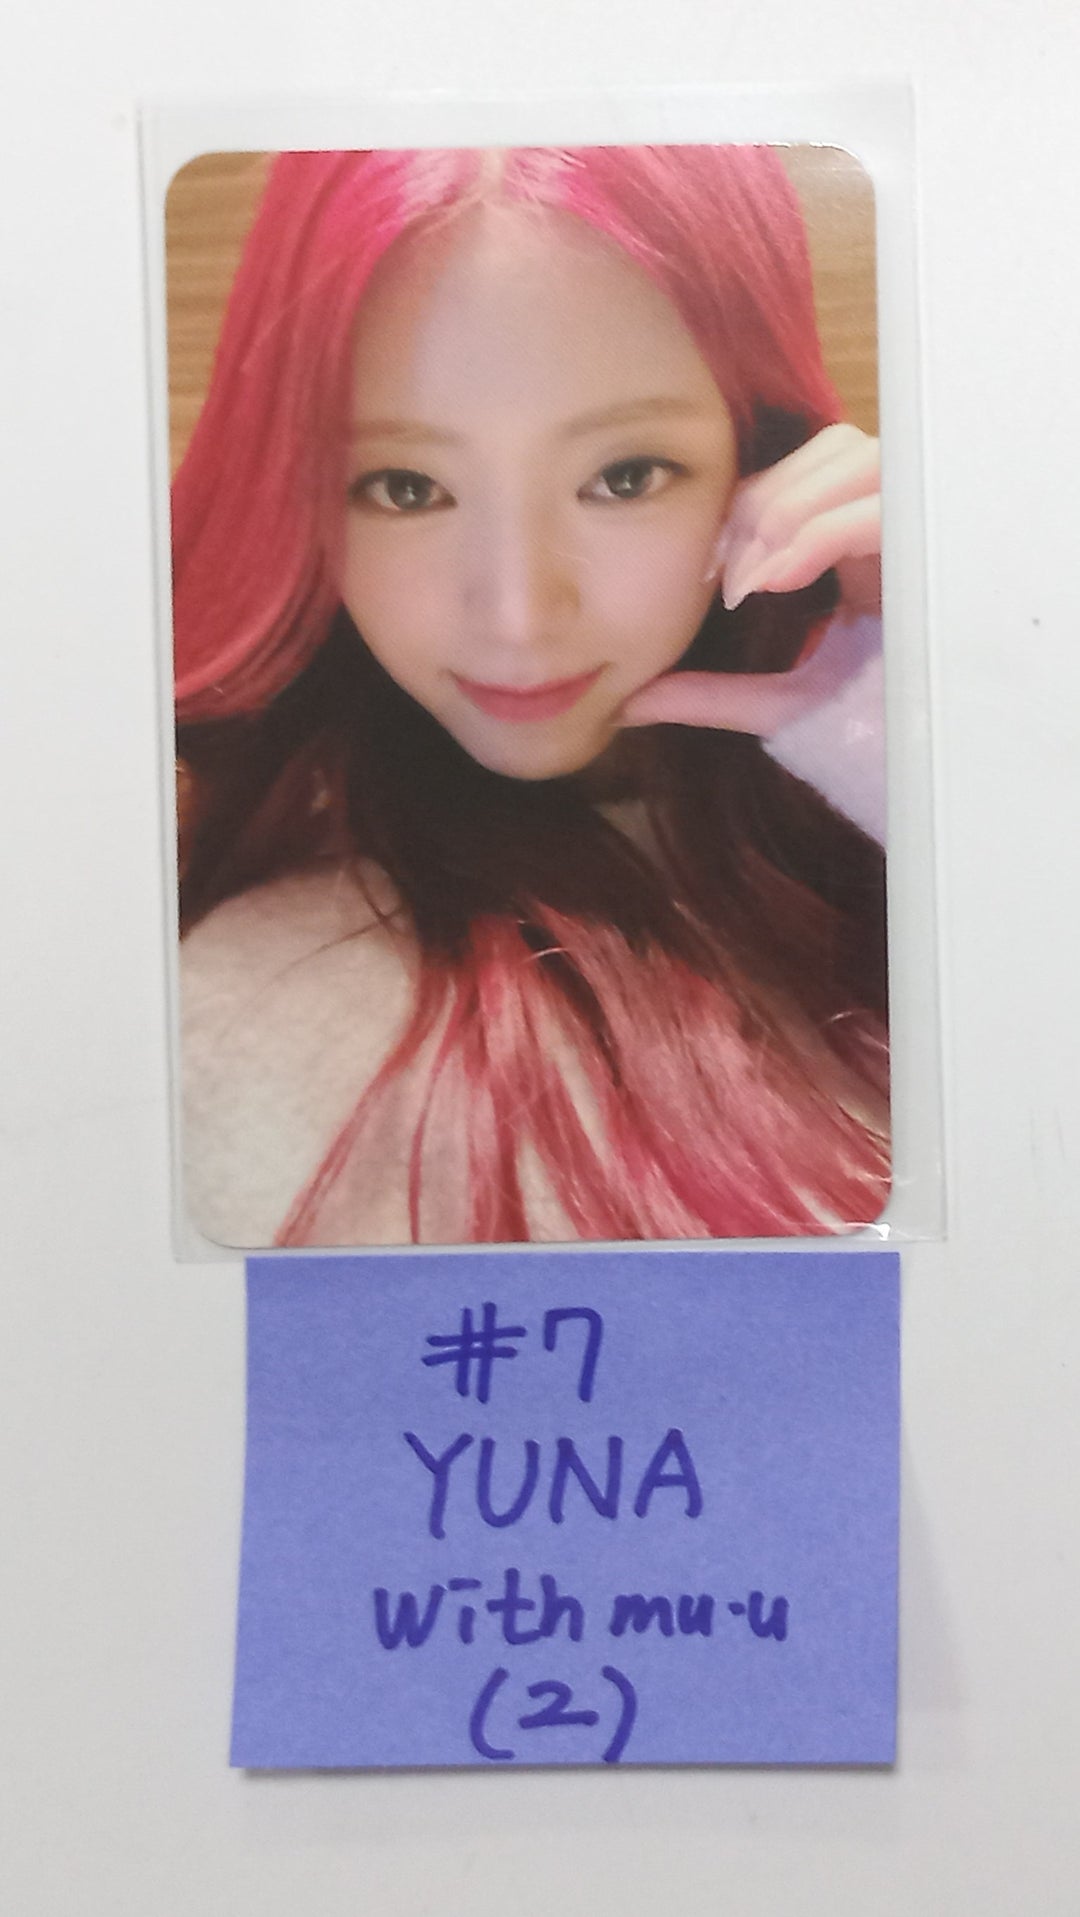 ITZY "BORN TO BE" - Withmuu Fansign Event Photocard Round 2 [24.2.2]